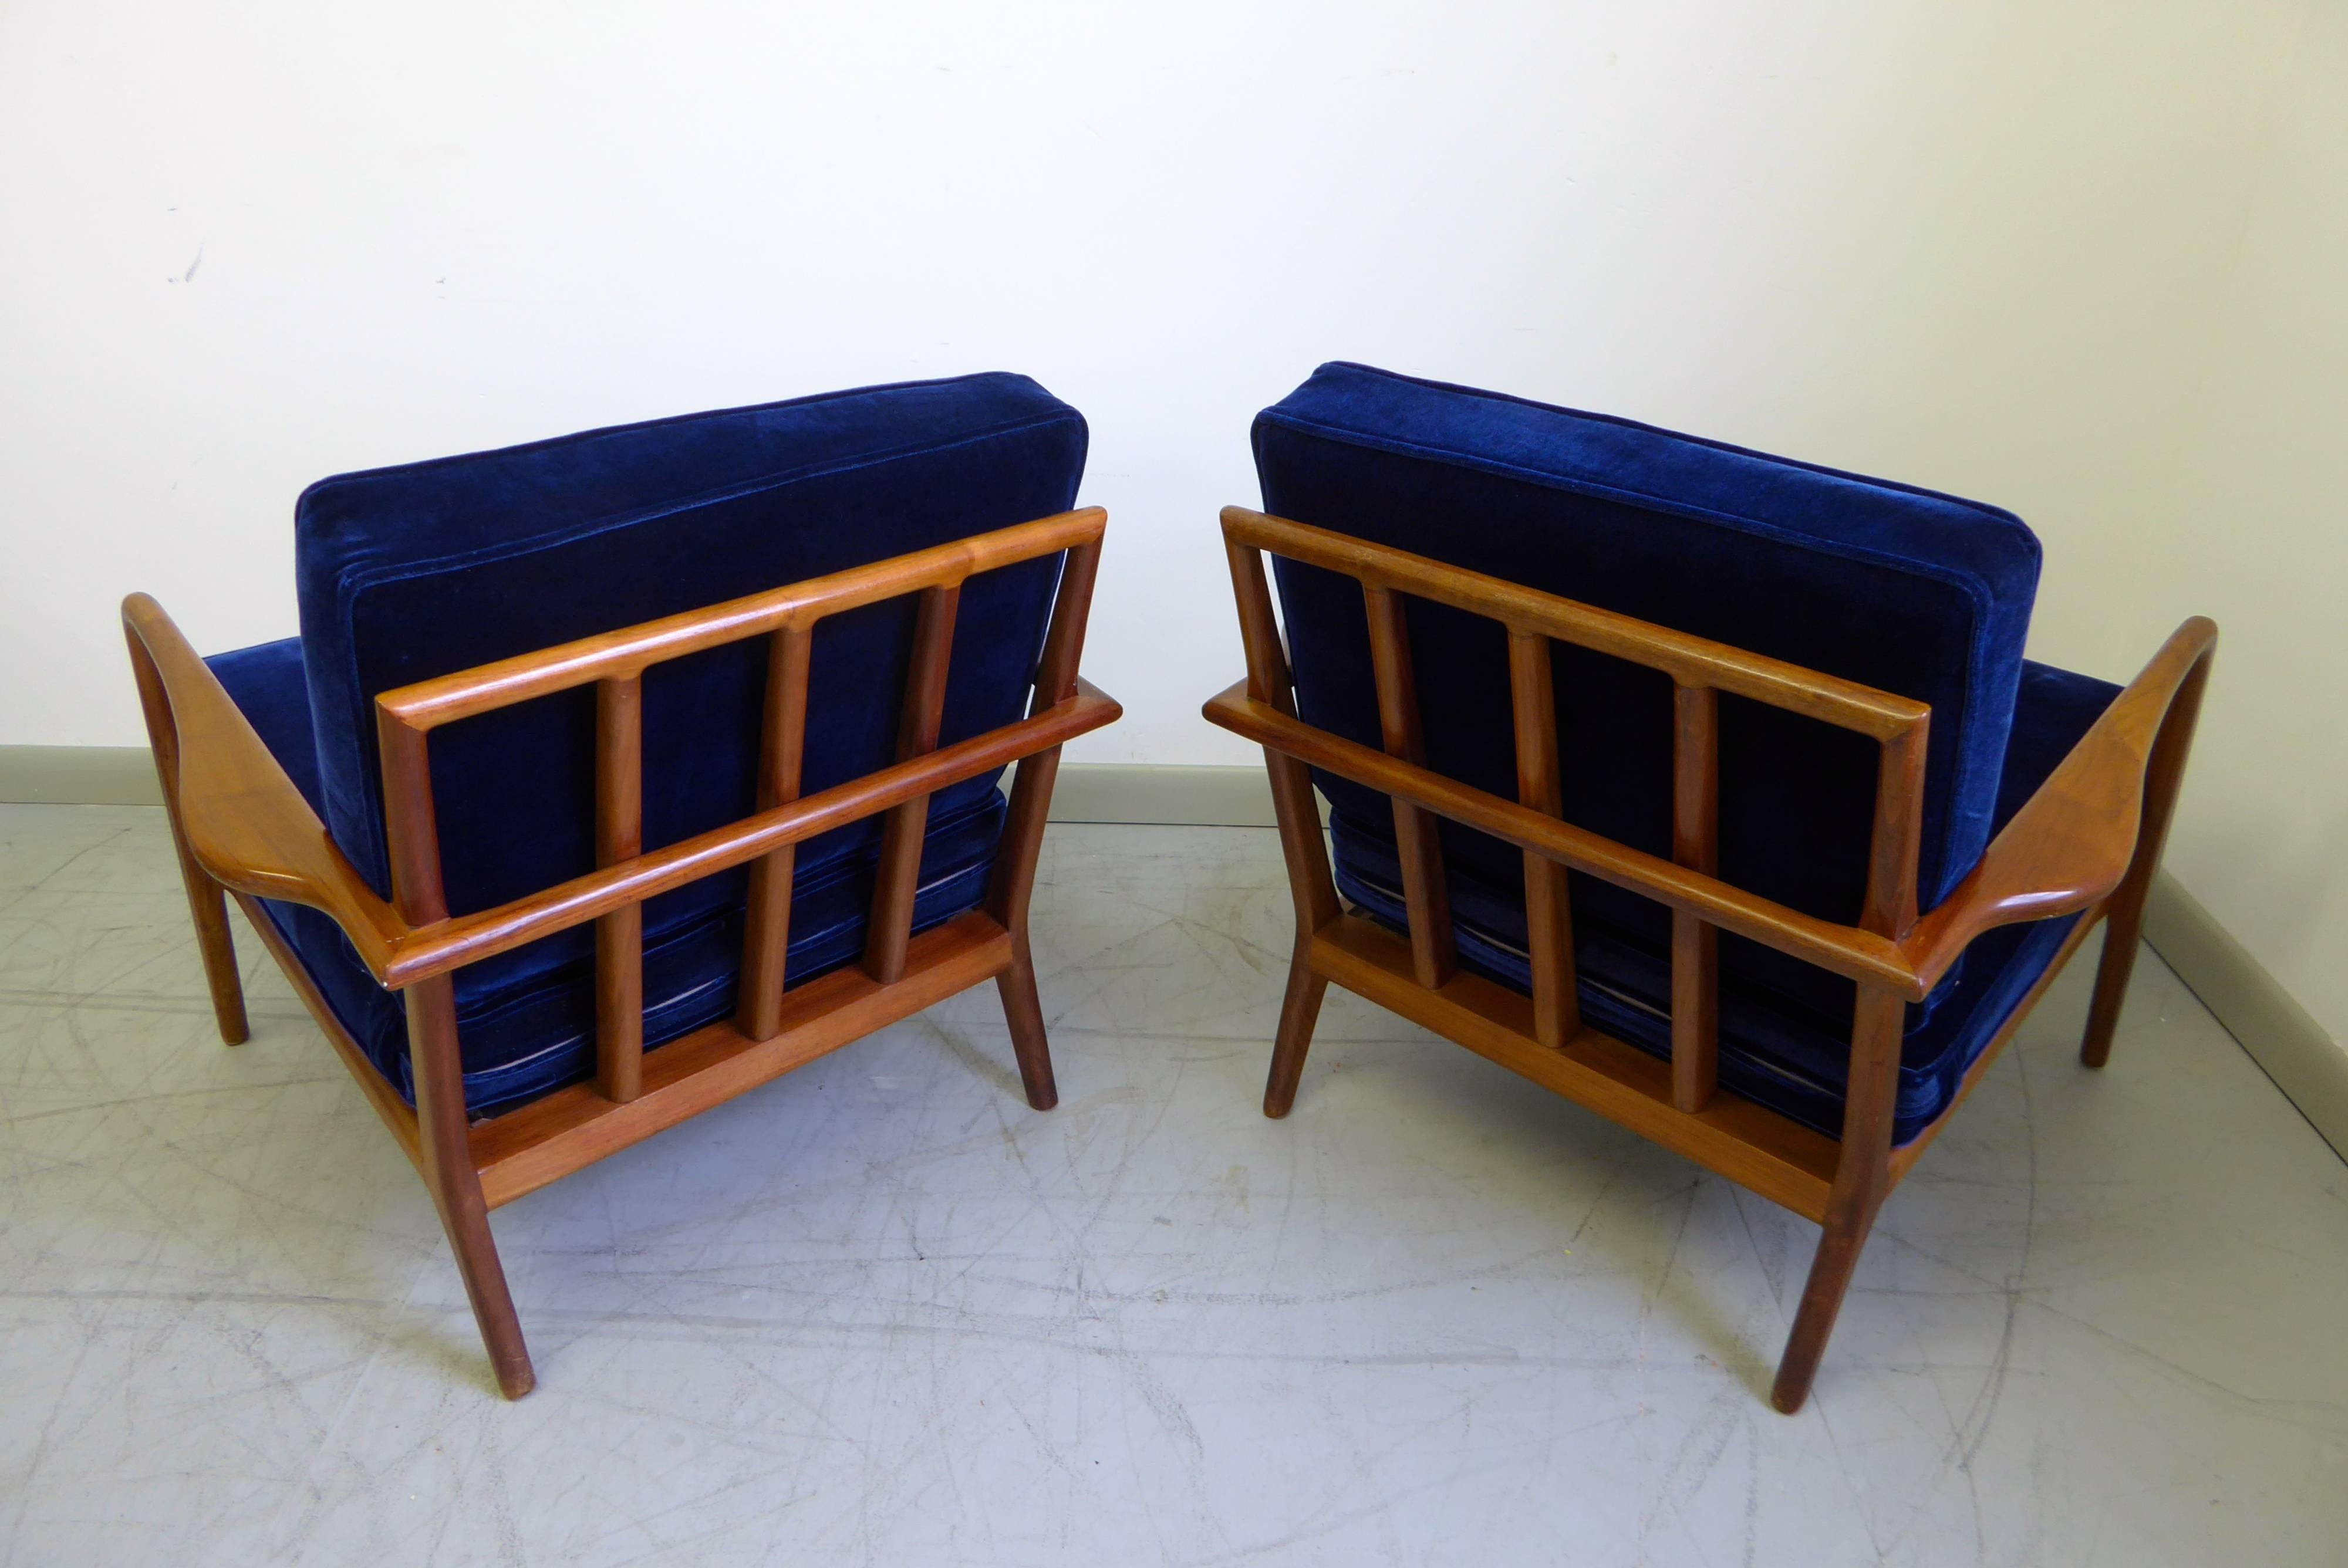 Gorgeous pair of sculptural walnut lounge chairs by Mel Smilow, 1960s. Freshly reupholstered in a deep sapphire velvet and walnut frames professionally refinished. Stunning from all angles, excellent condition.

